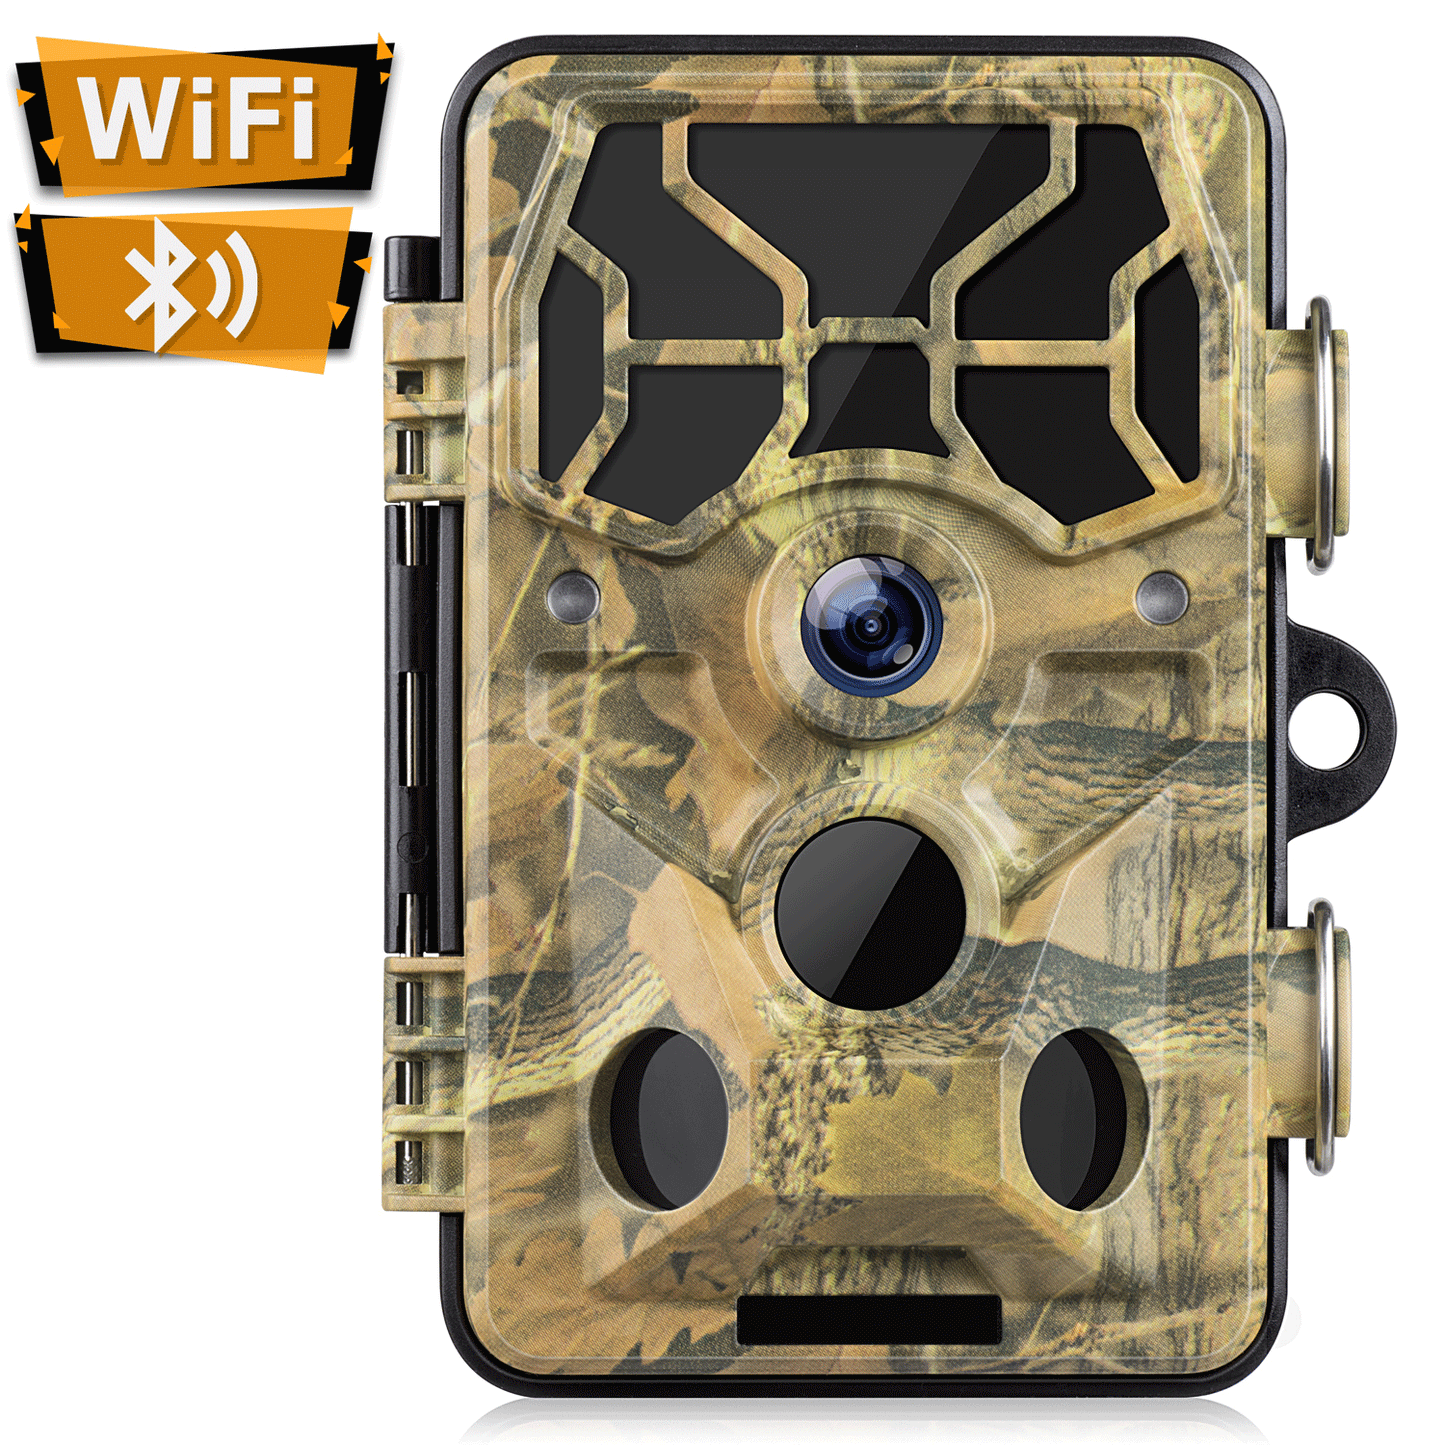 Campark WiFi Trail Camera 20MP 1296P Bluetooth Deer Hunting Game Camera Outdoor Wildlife Monitoring Night Vision 3 Infrared Sensors Waterproof 2.4"LCD